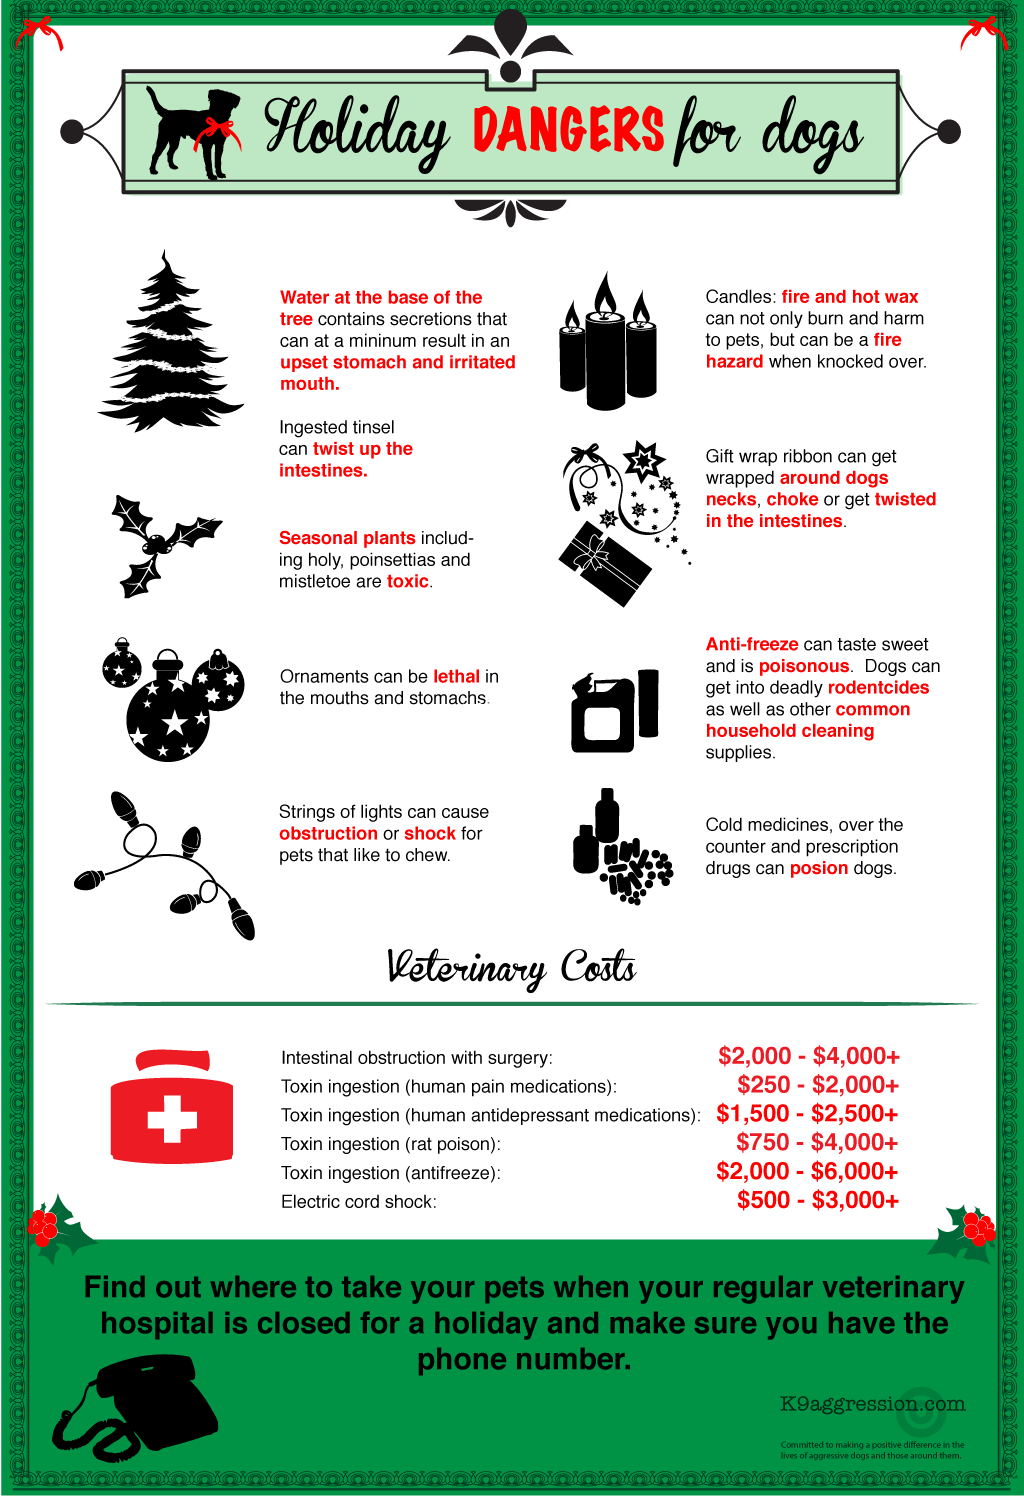 Dangerous Items for Dogs During the Holiday Season [Infographic] Infographic